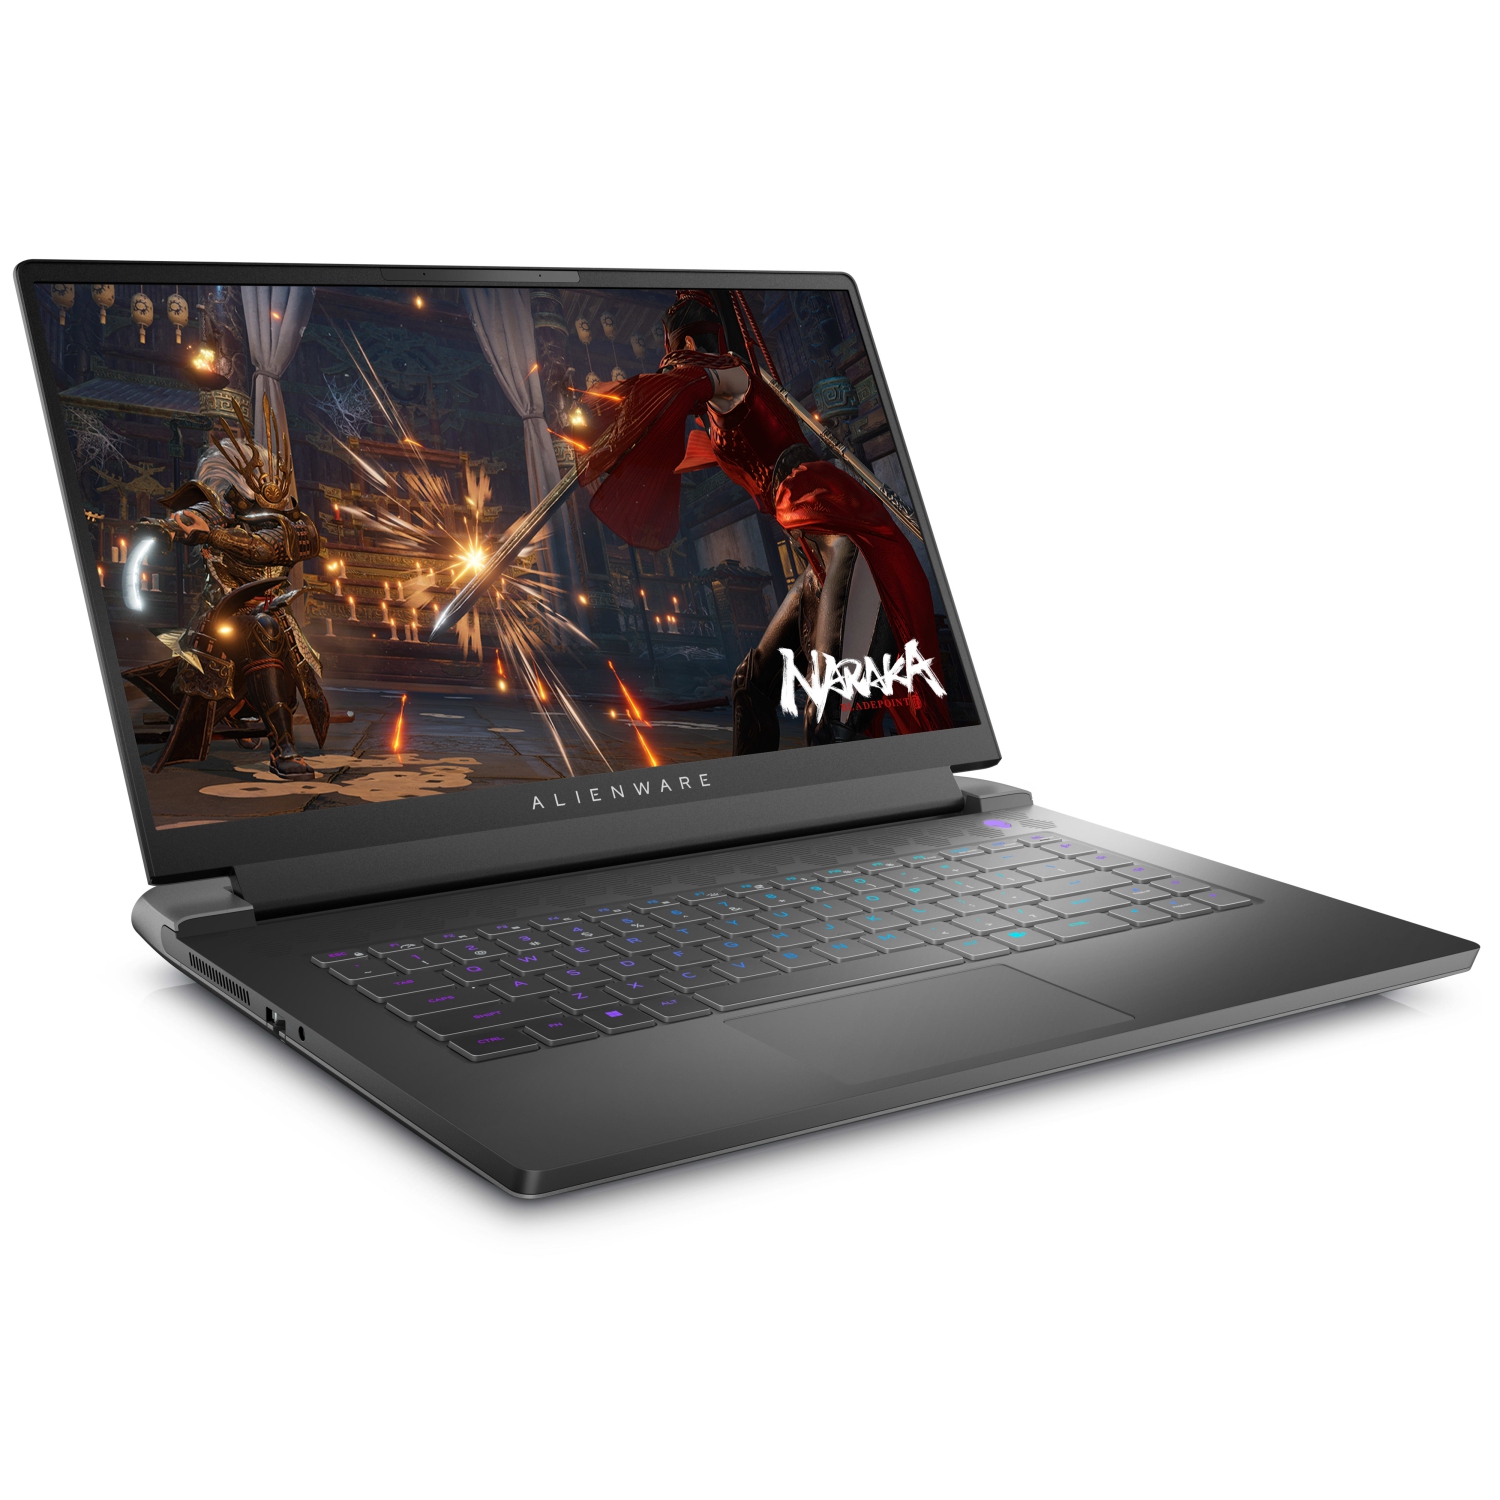 Refurbished (Excellent) – Dell Alienware m15 R7 Gaming Laptop (2022) | 15.6" FHD | Core i9 - 2TB SSD - 32GB RAM - 3070 Ti | 14 Cores @ 5 GHz - 12th Gen CPU - 8GB GDDR6X